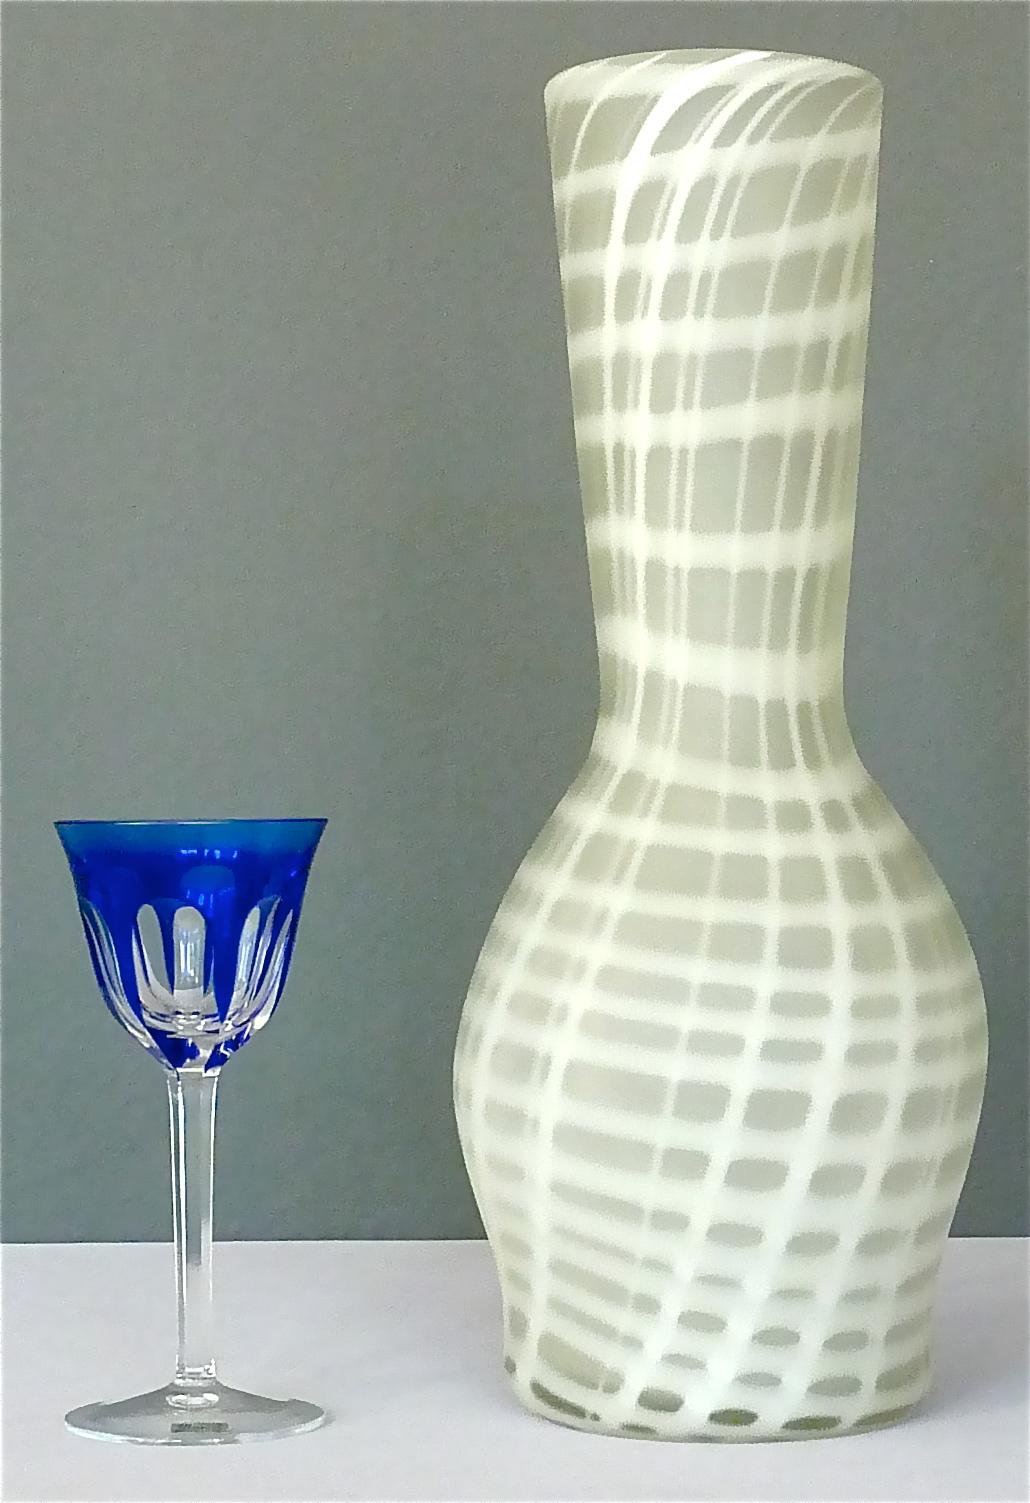 Signed Large Giuliano Tosi Art Glass Vase Satin White Stripes, Italy, 1970s For Sale 5